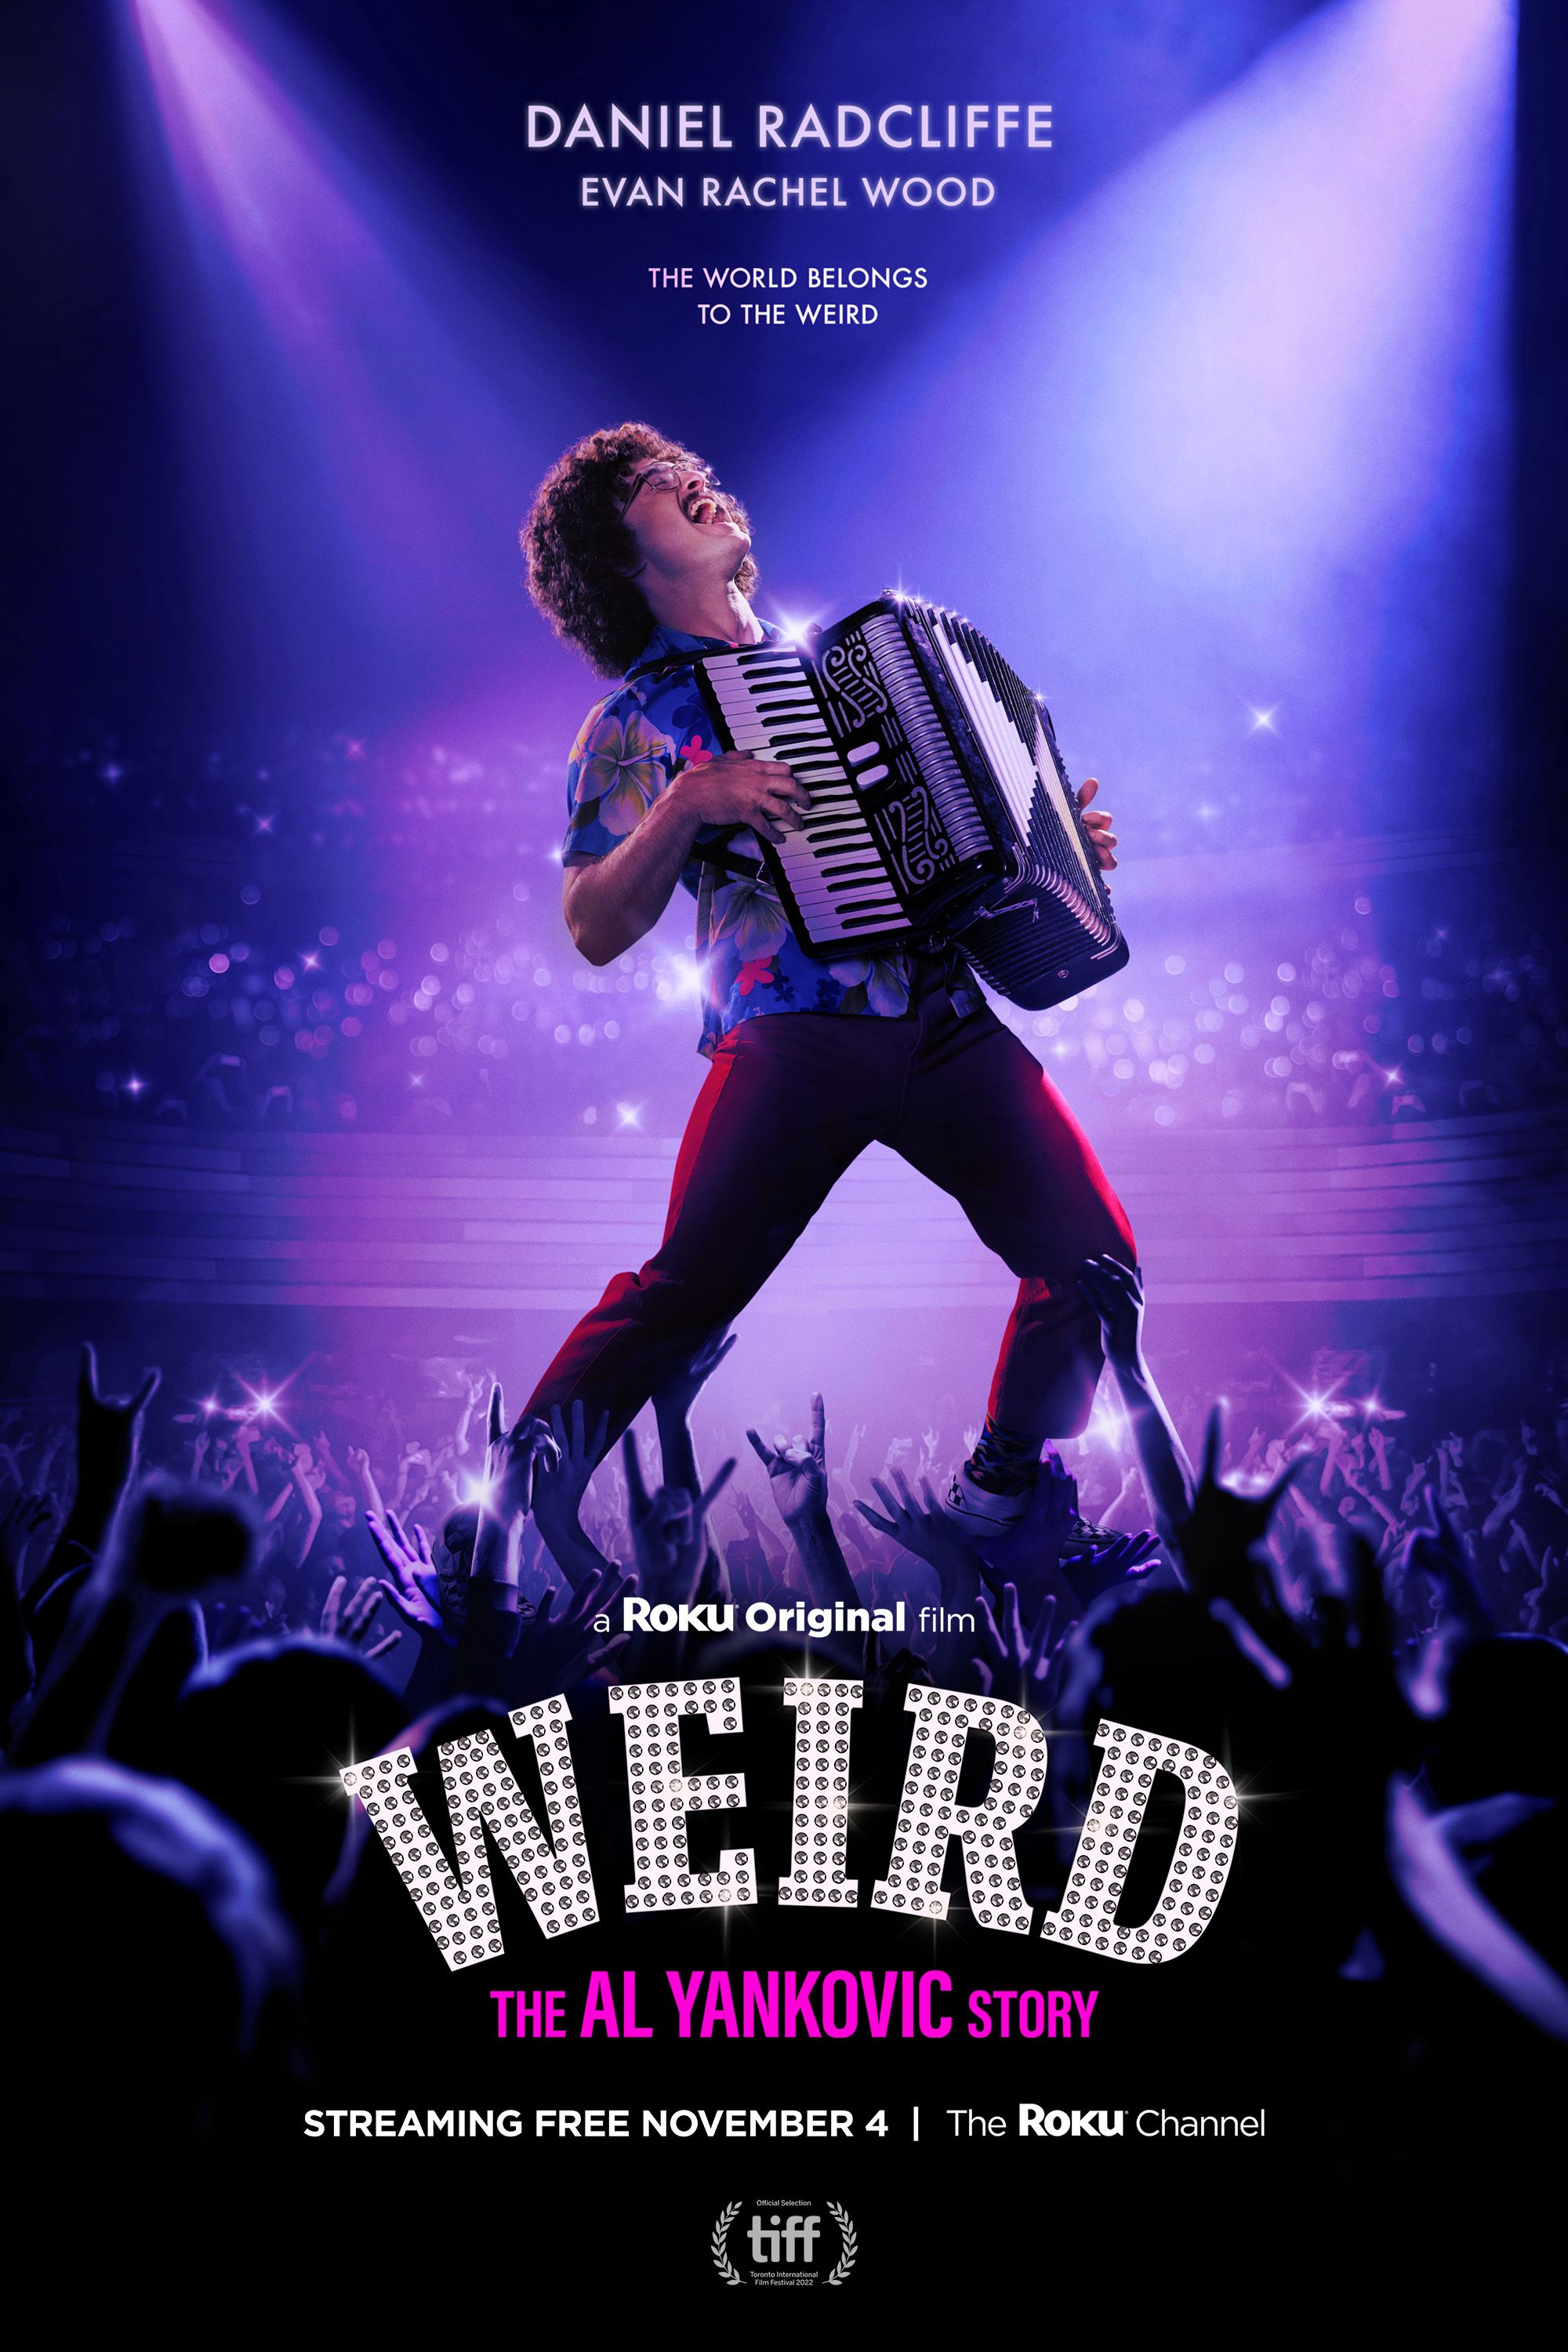 Weird The Al Yankovic Story Film Poster